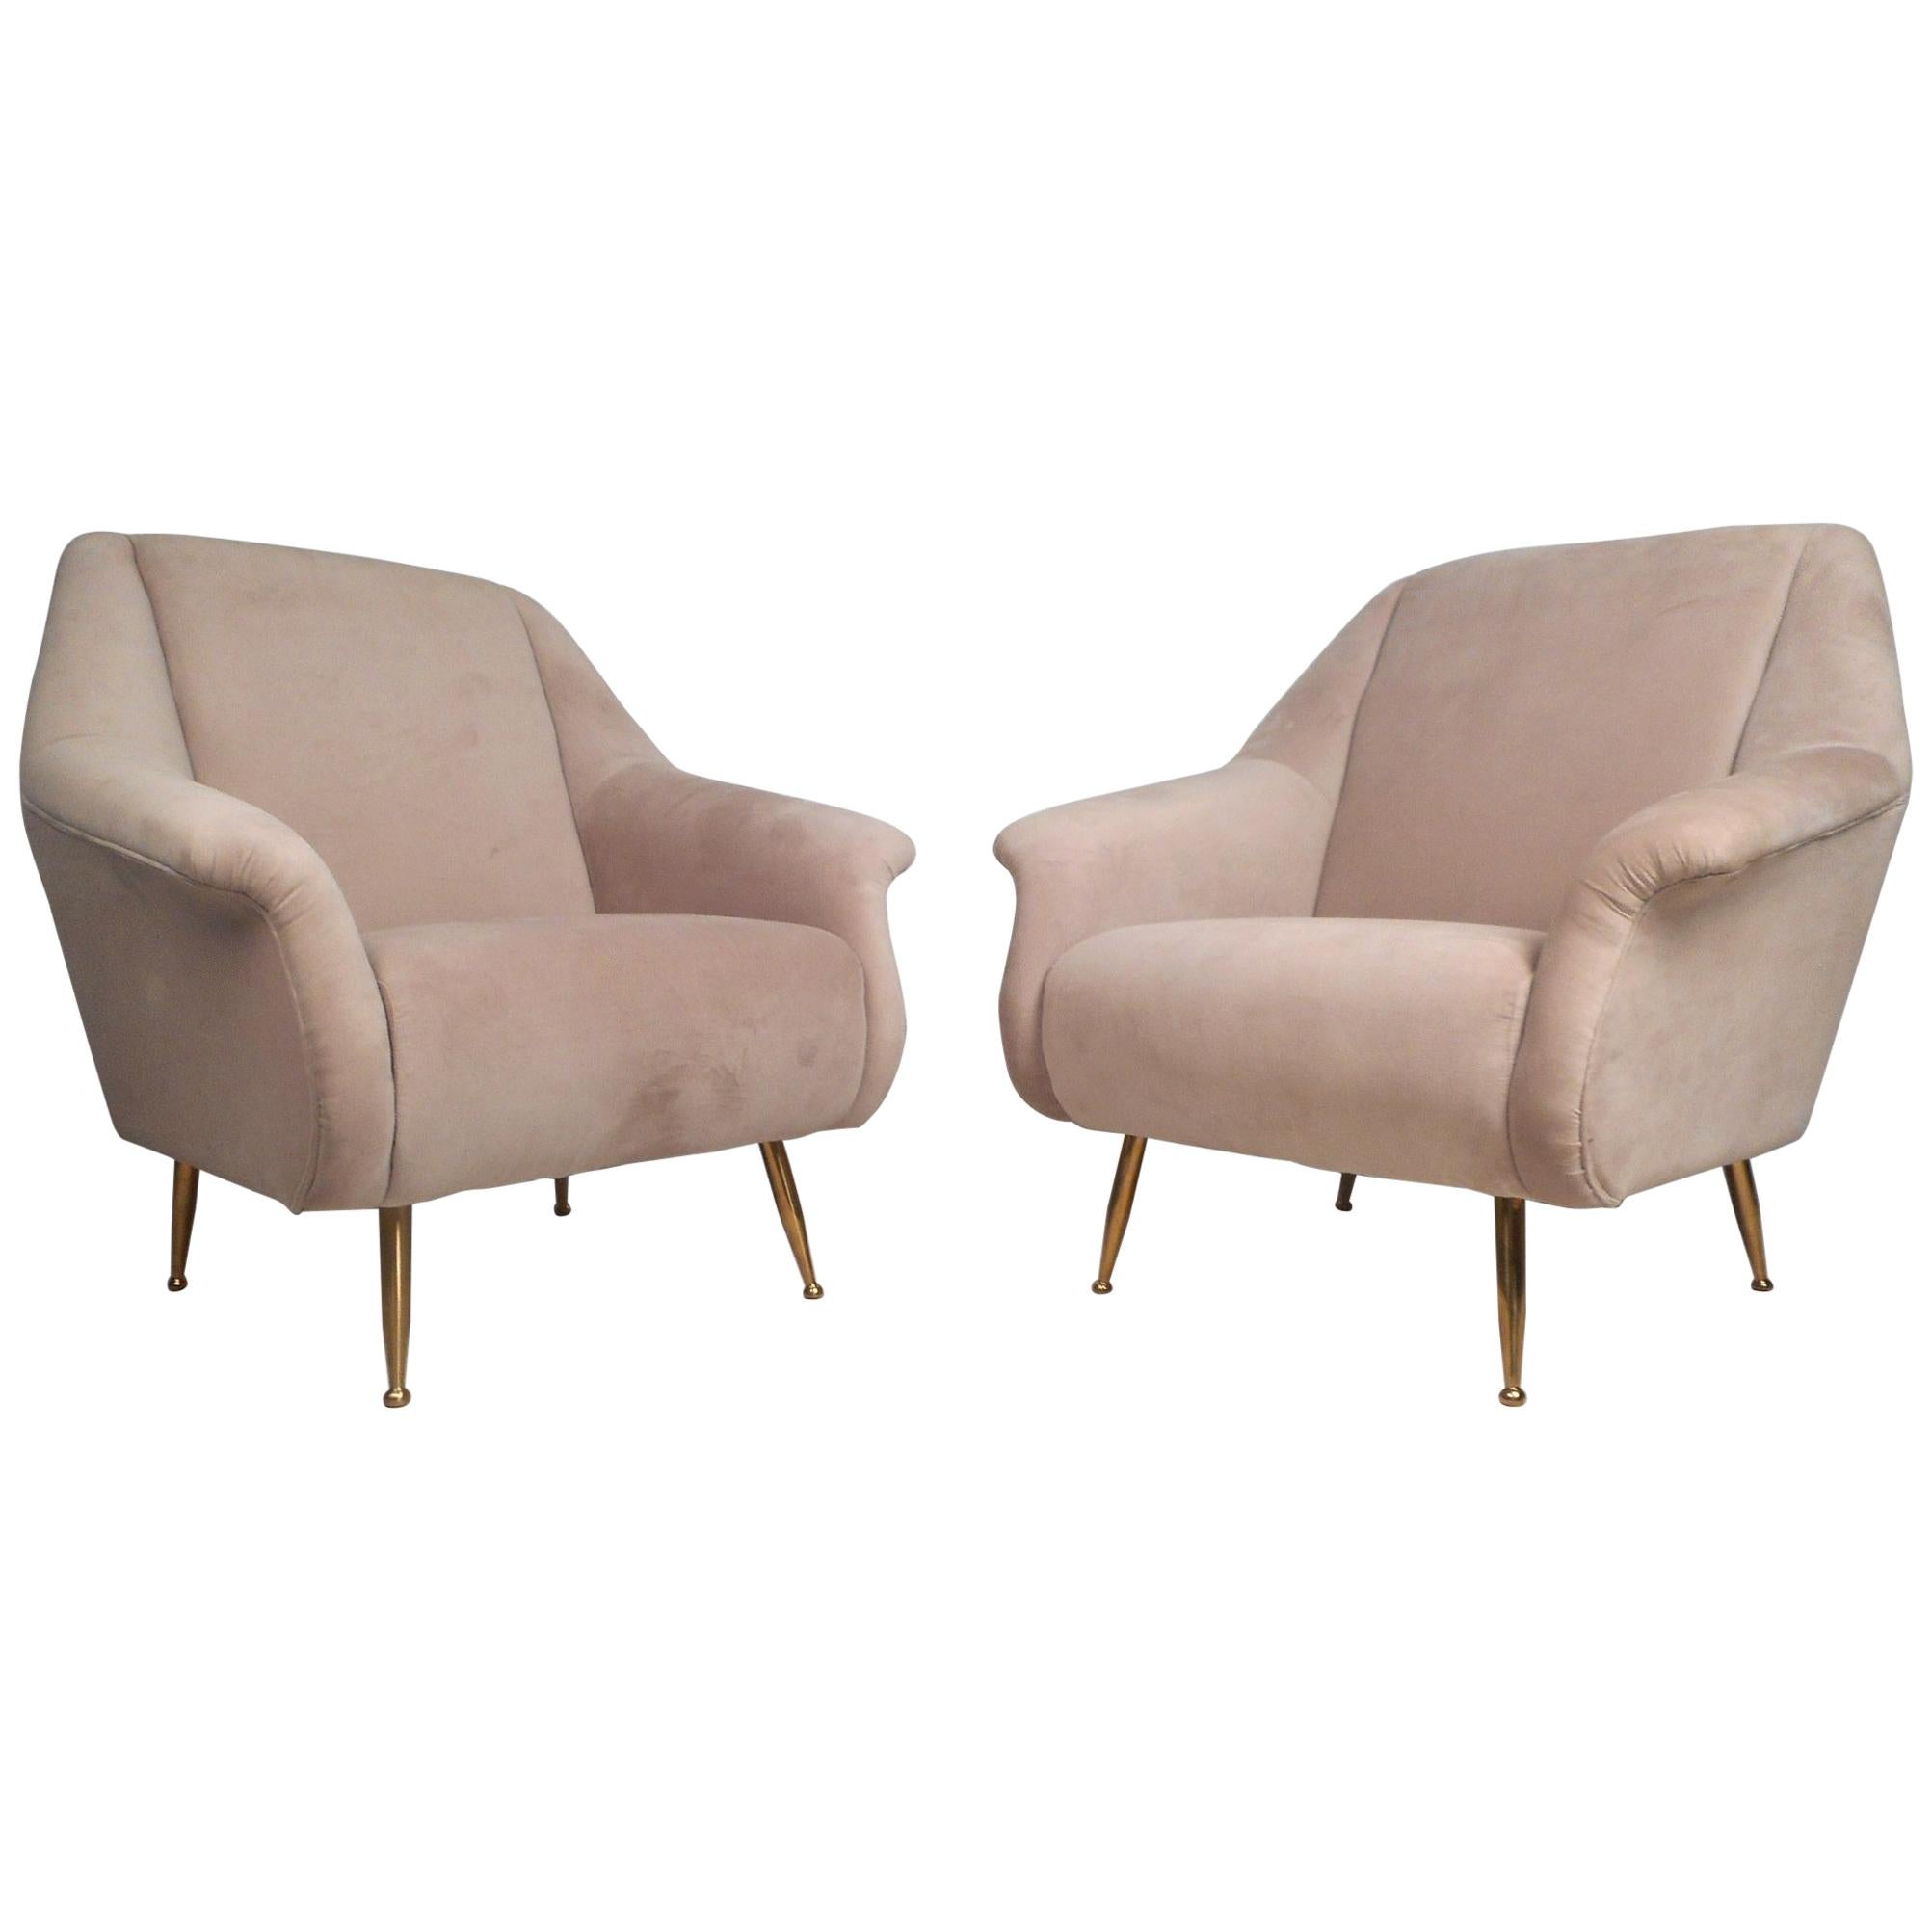 Pair of Contemporary Modern Italian Style Lounge Chairs